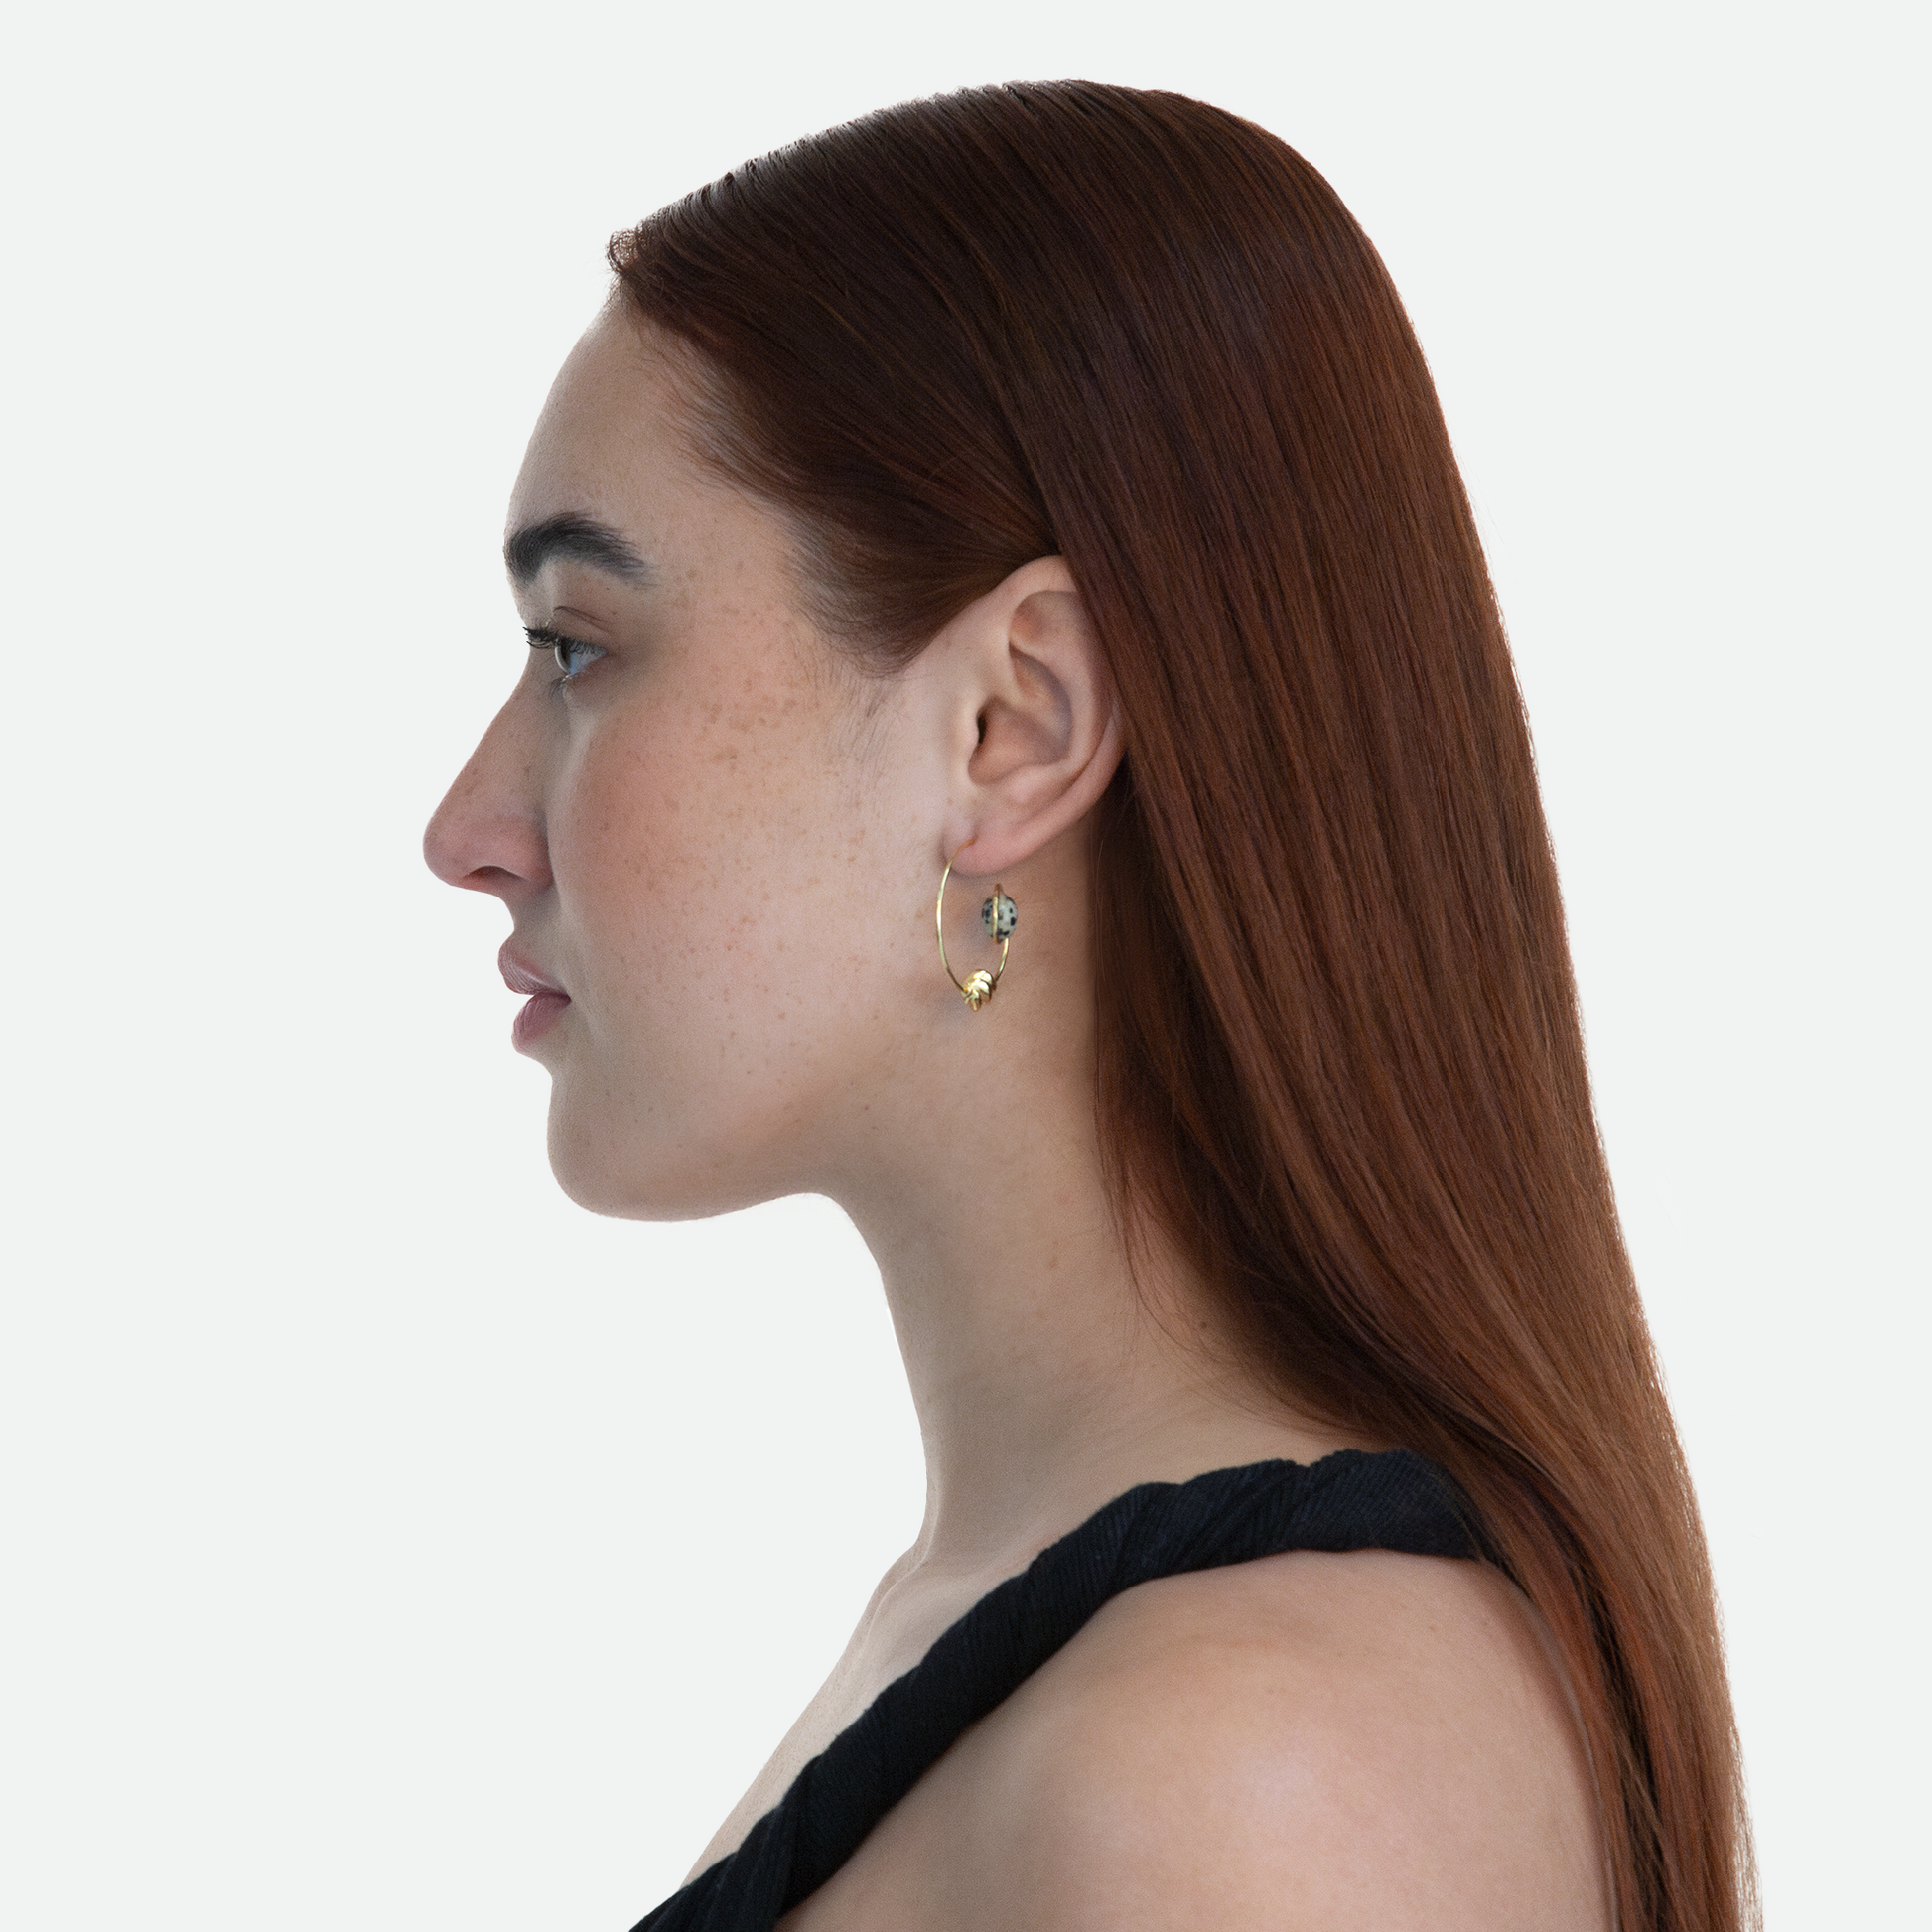 Side profile of model wearing the Orbit earrings that mirror a planet and its moon with a Dalmatian Jasper stone and bead set in a golden arc, on a white background.